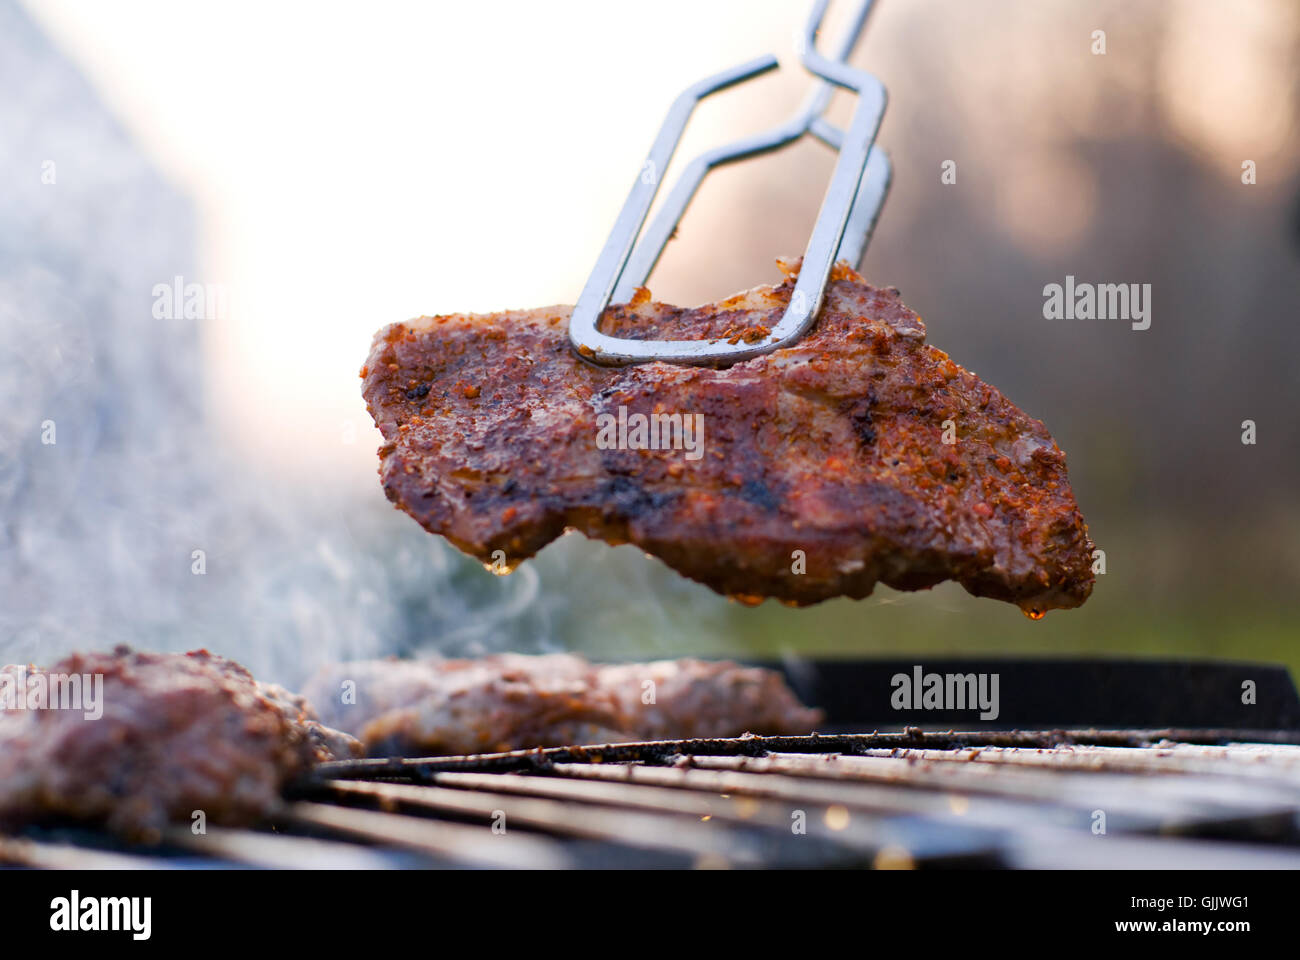 Barbecue Barbecue grill Banque D'Images